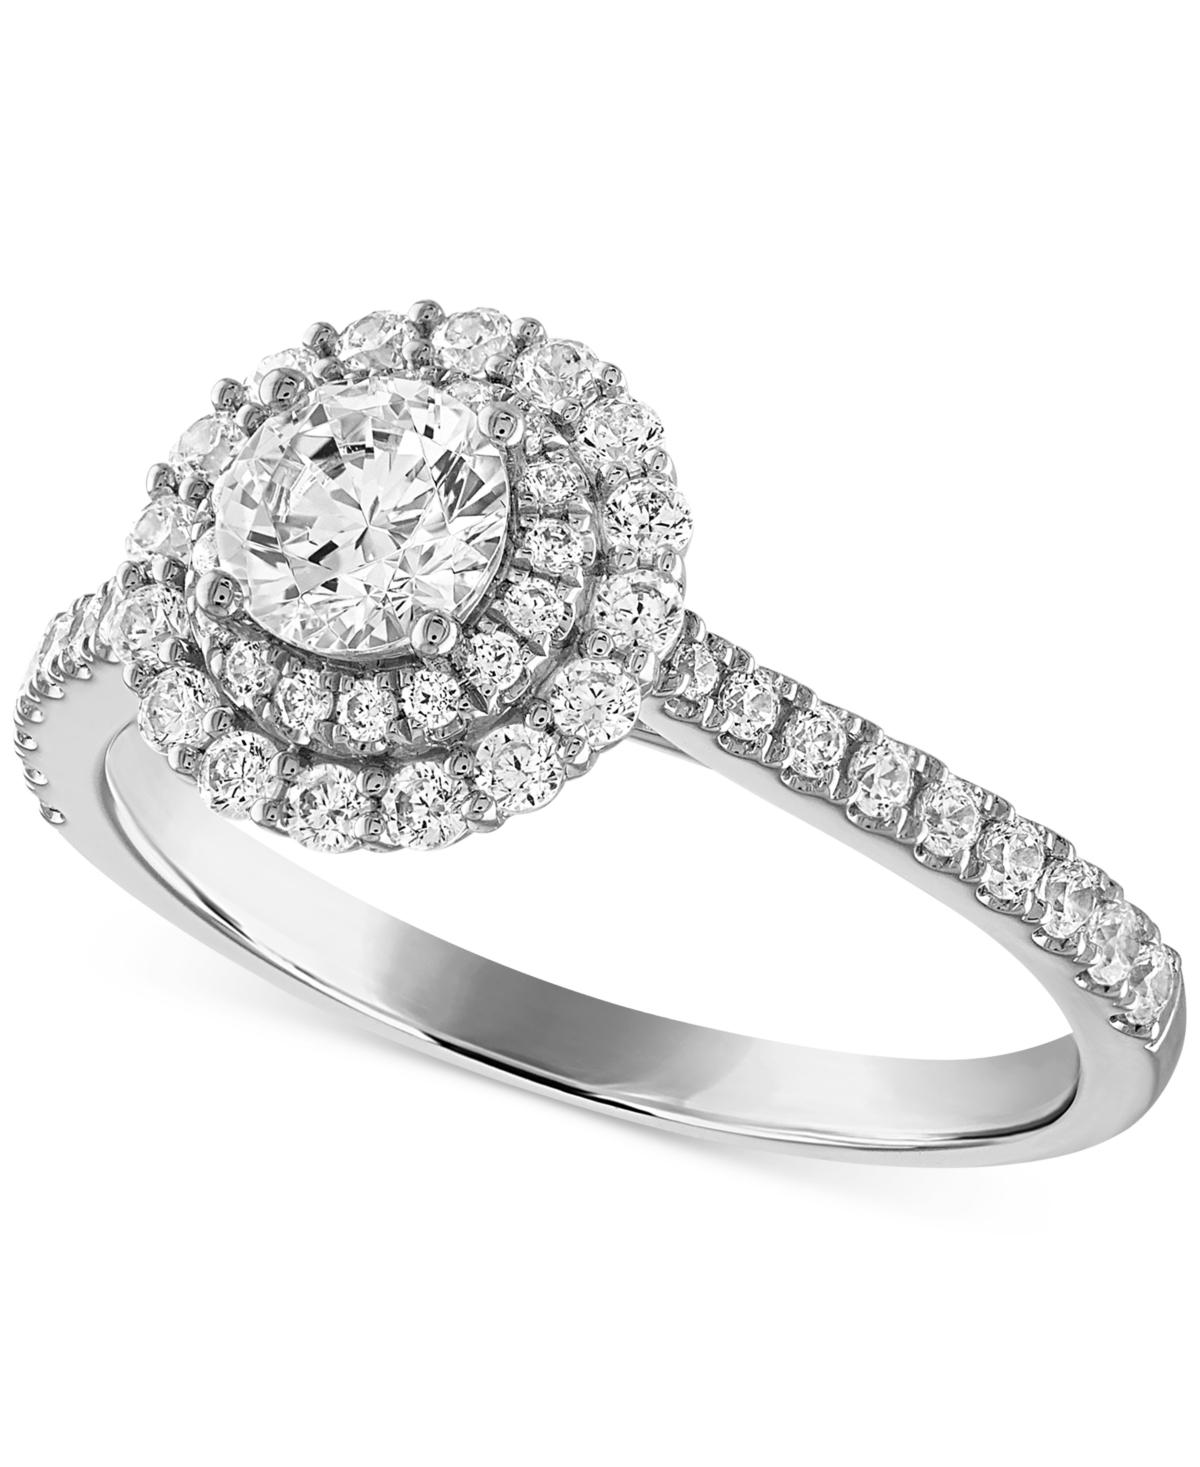 Certified Diamond Halo Engagement Ring (1 ct. t.w.) in 14k White Gold featuring diamonds with the De Beers Code of Origin, Created for Macy's